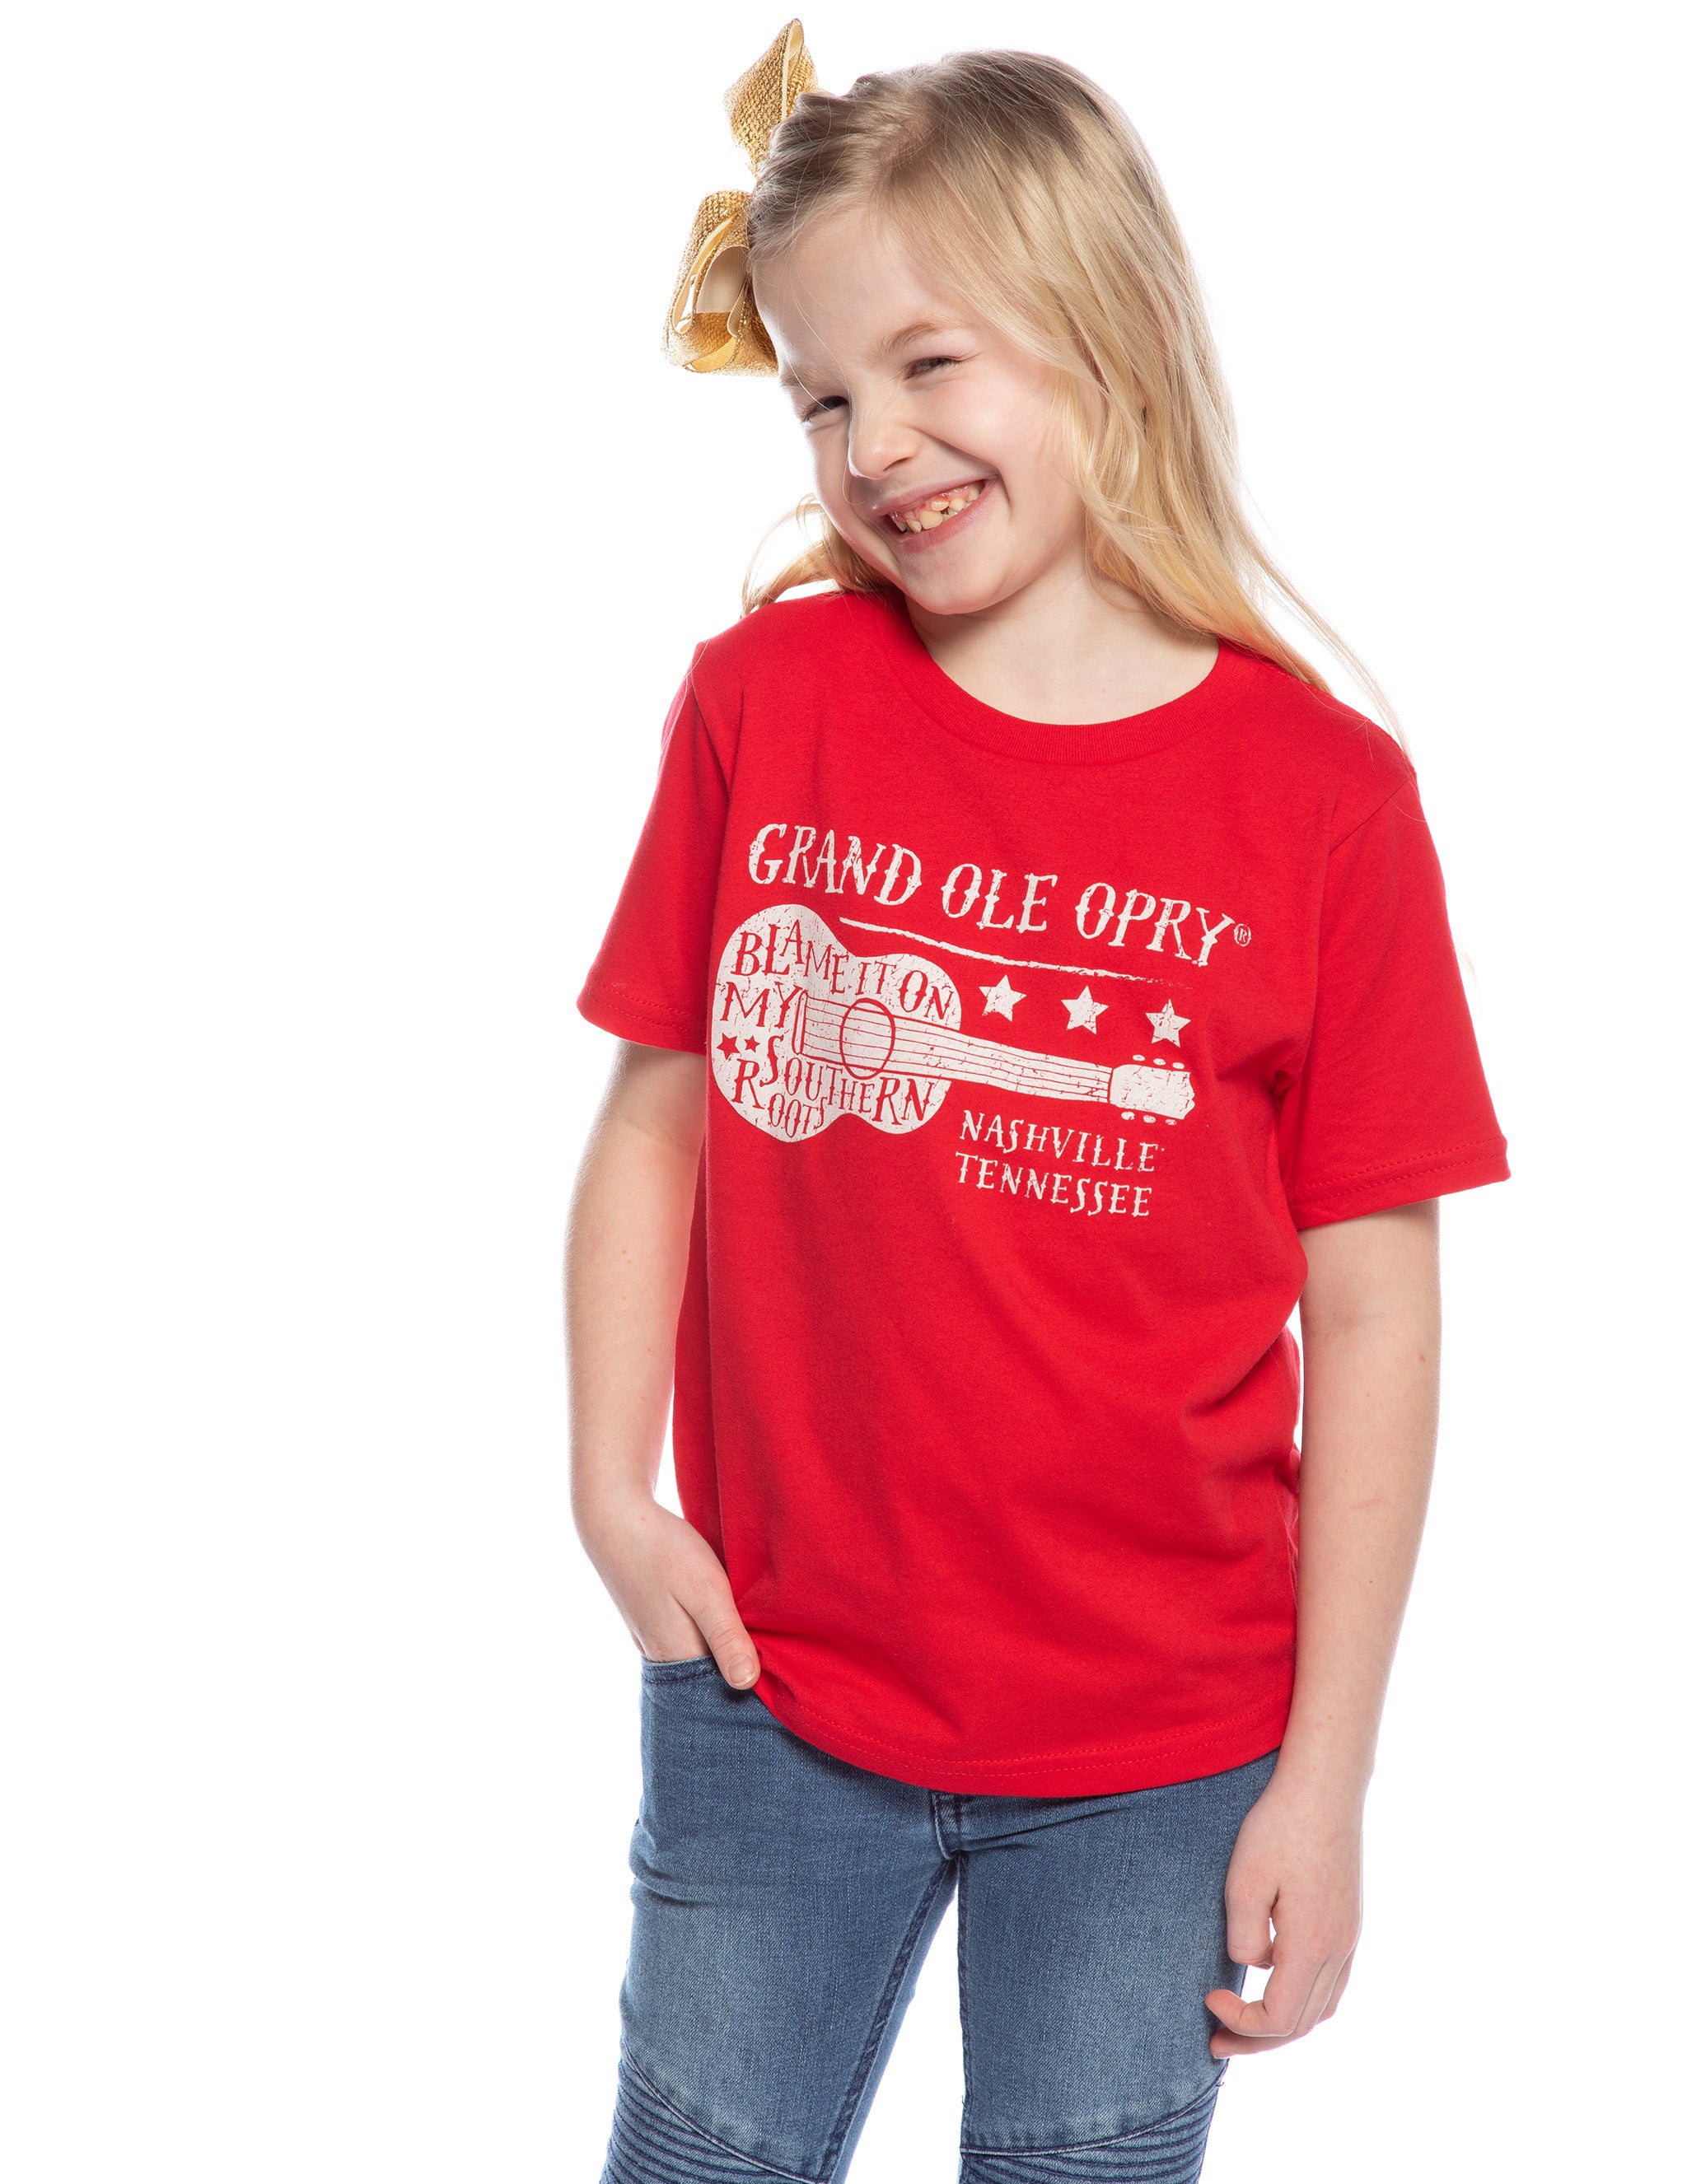 Opry Blame it on My Roots Youth T-Shirt